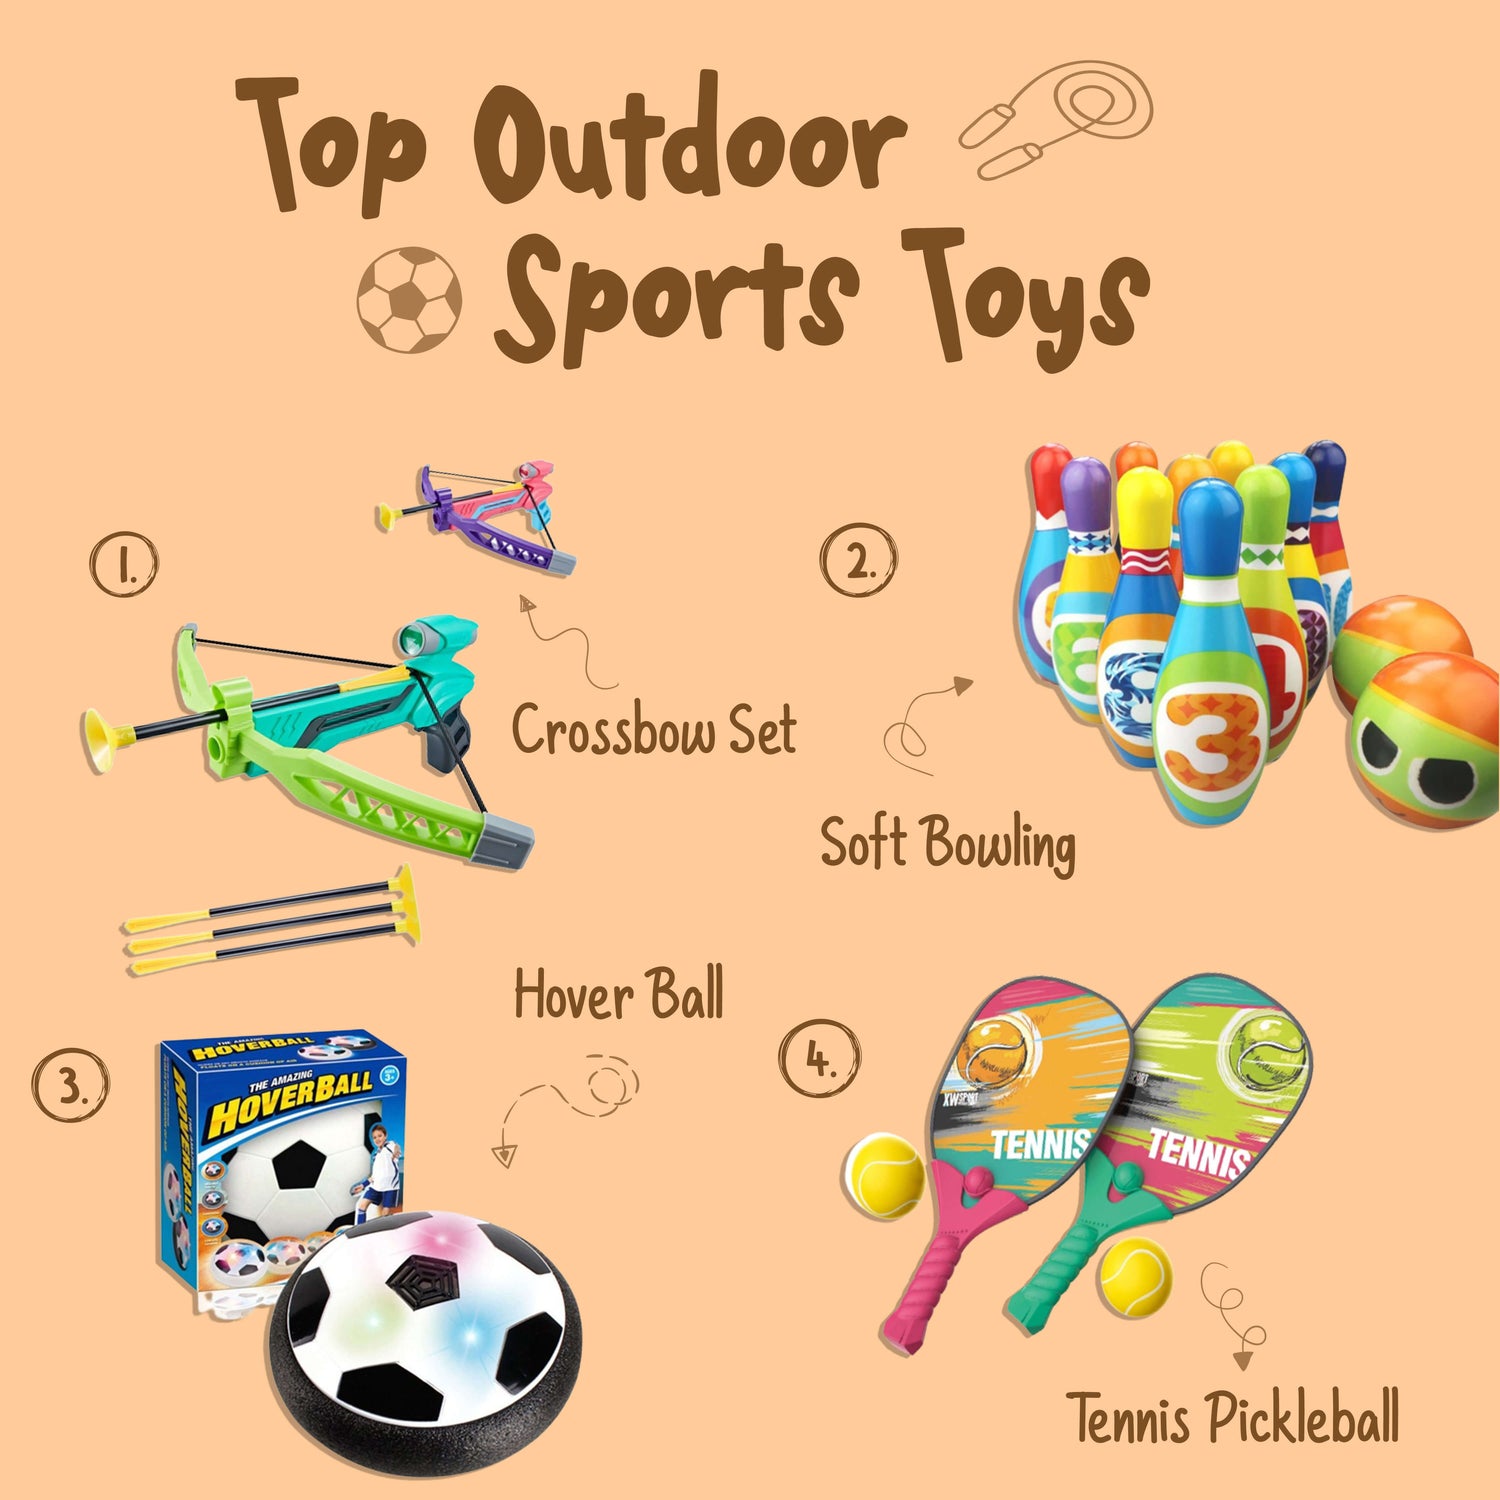 Top Outdoor Sports Toys